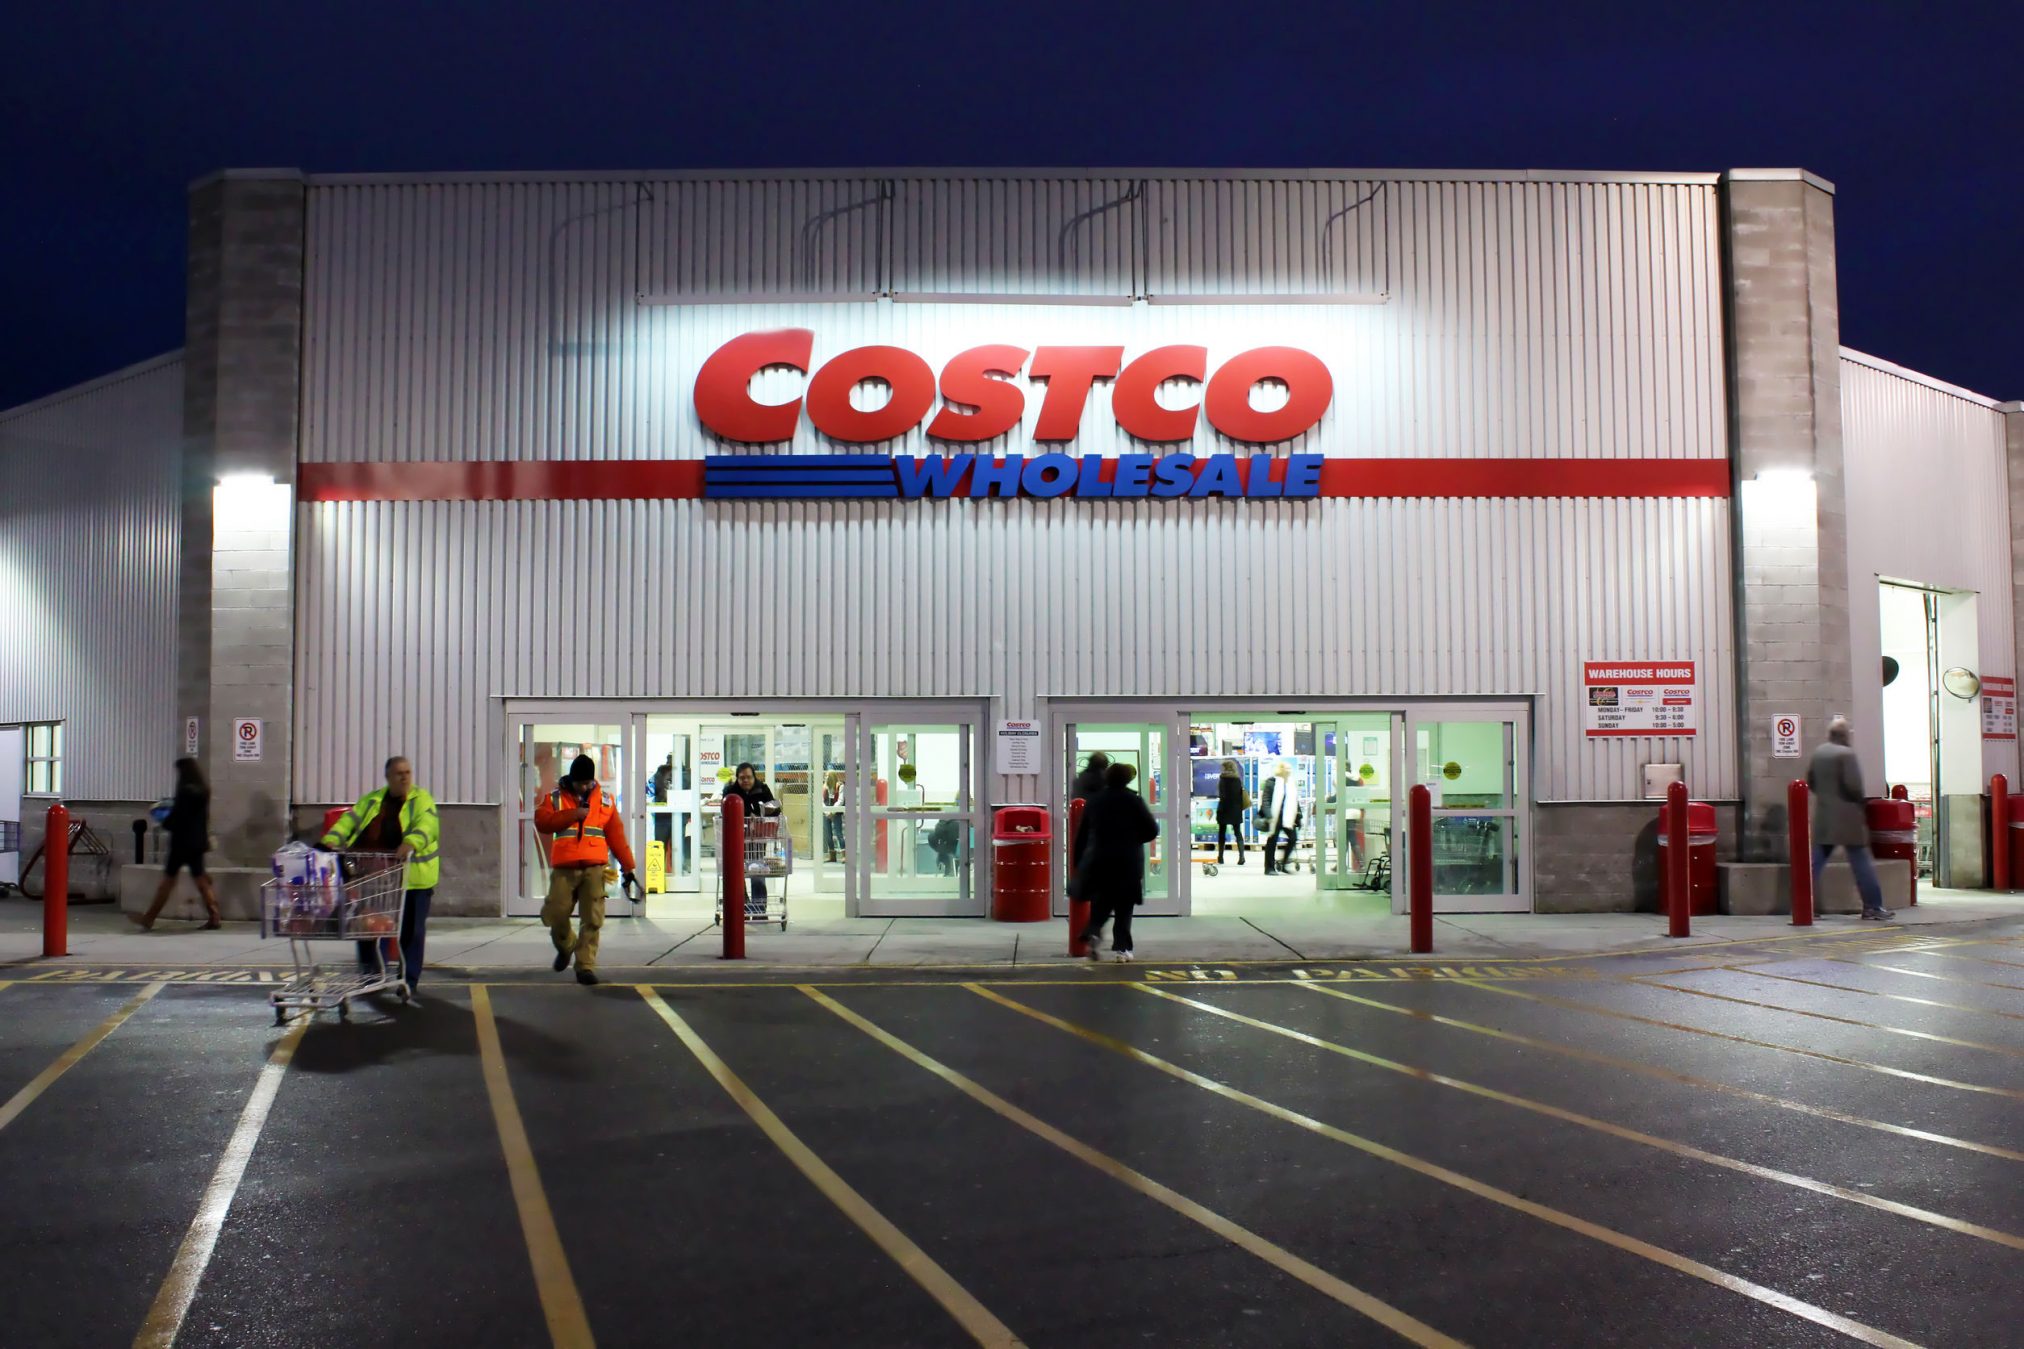 costco-incident-a-warning-on-corporate-ownership-ajp